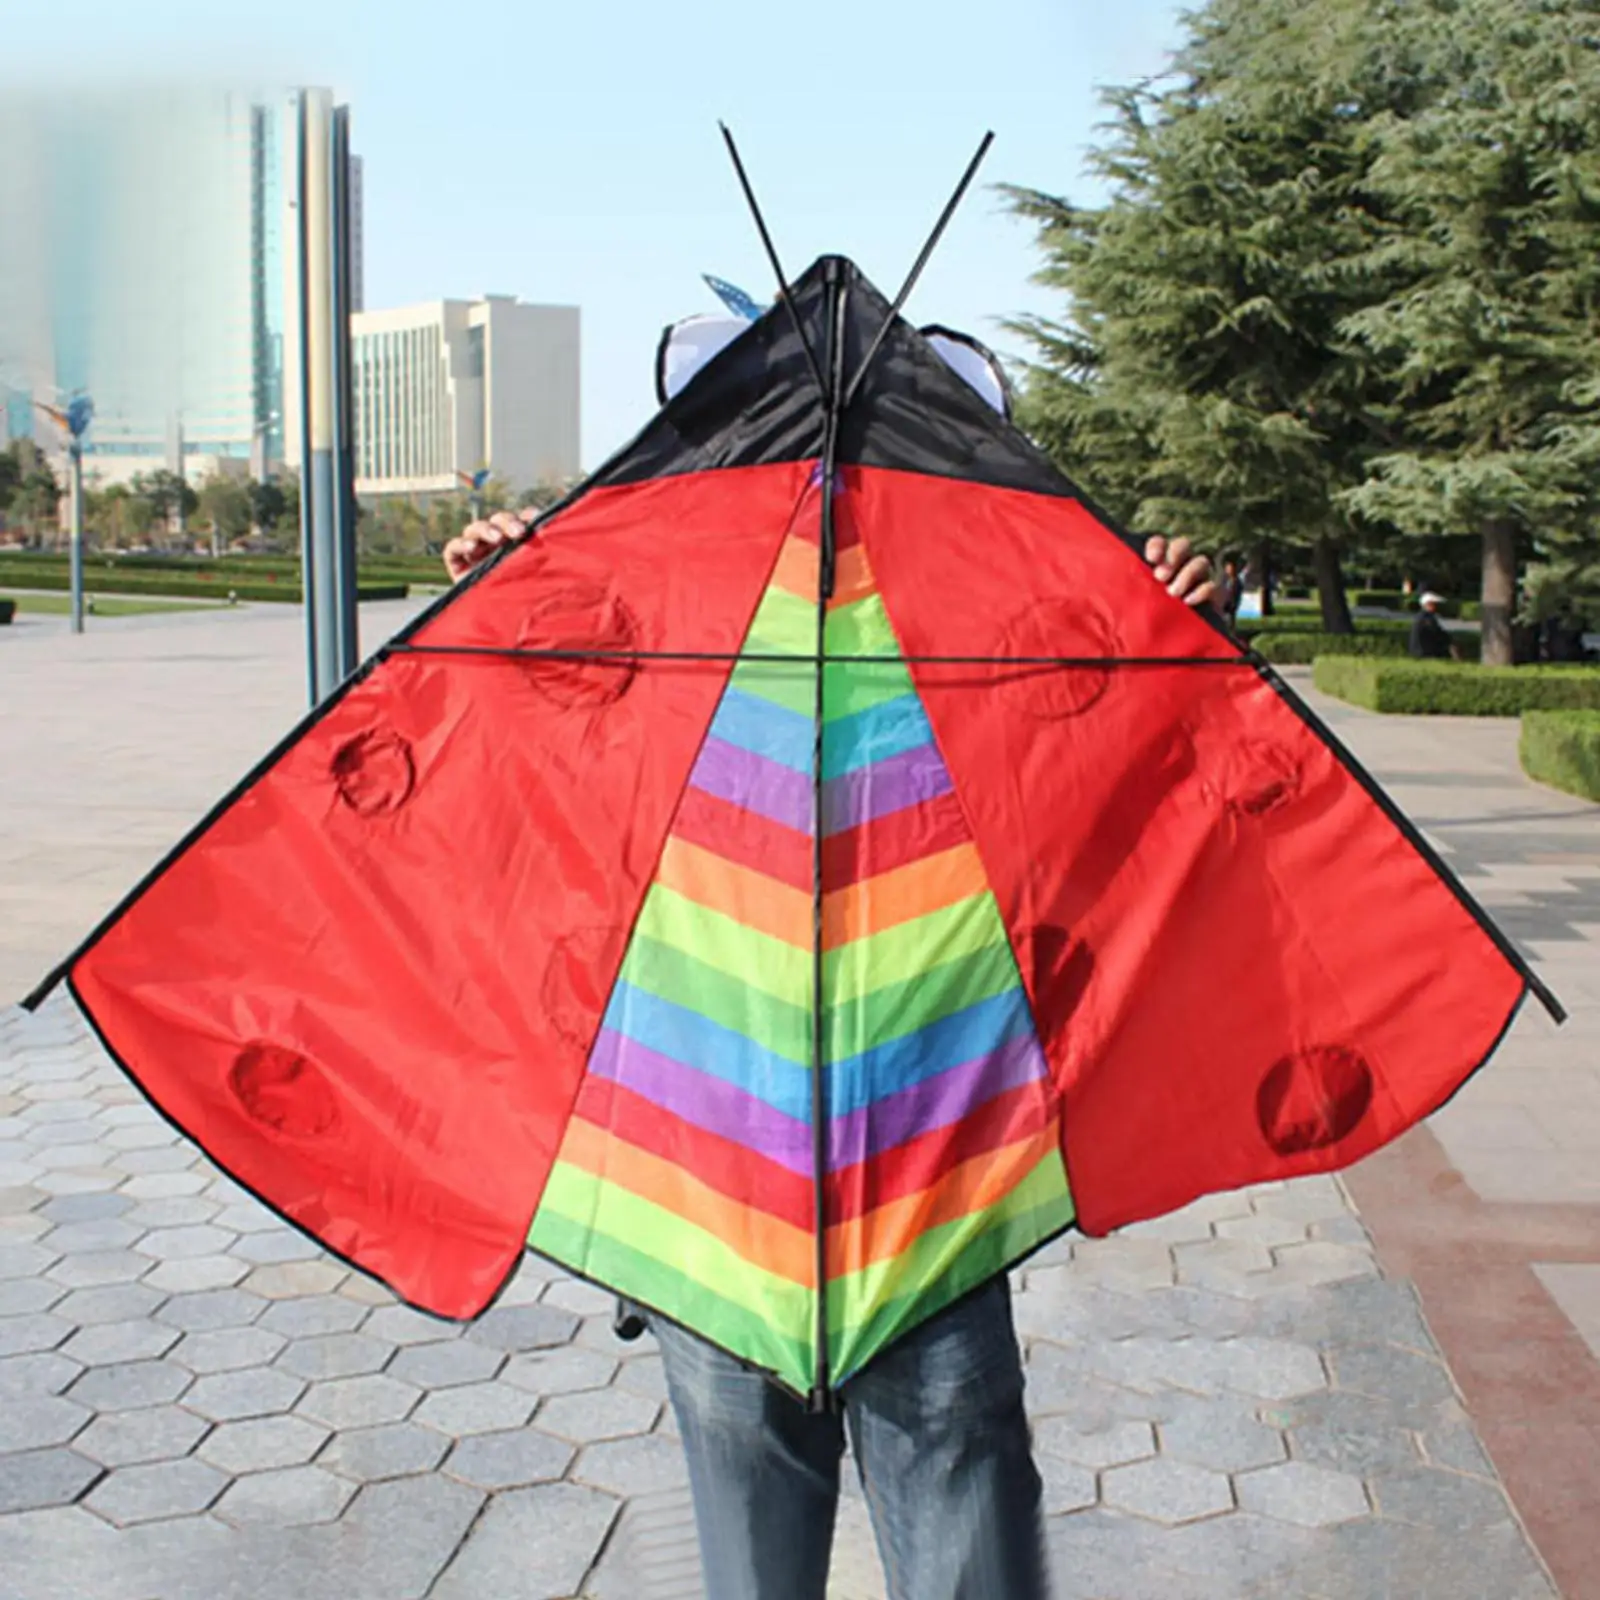 Vivid Delta Kite Fly Kite Single Line Fun Toy Easy to Fly Huge Wingspan Windsock Giant Triangle Ladybug Kite for Garden Sports